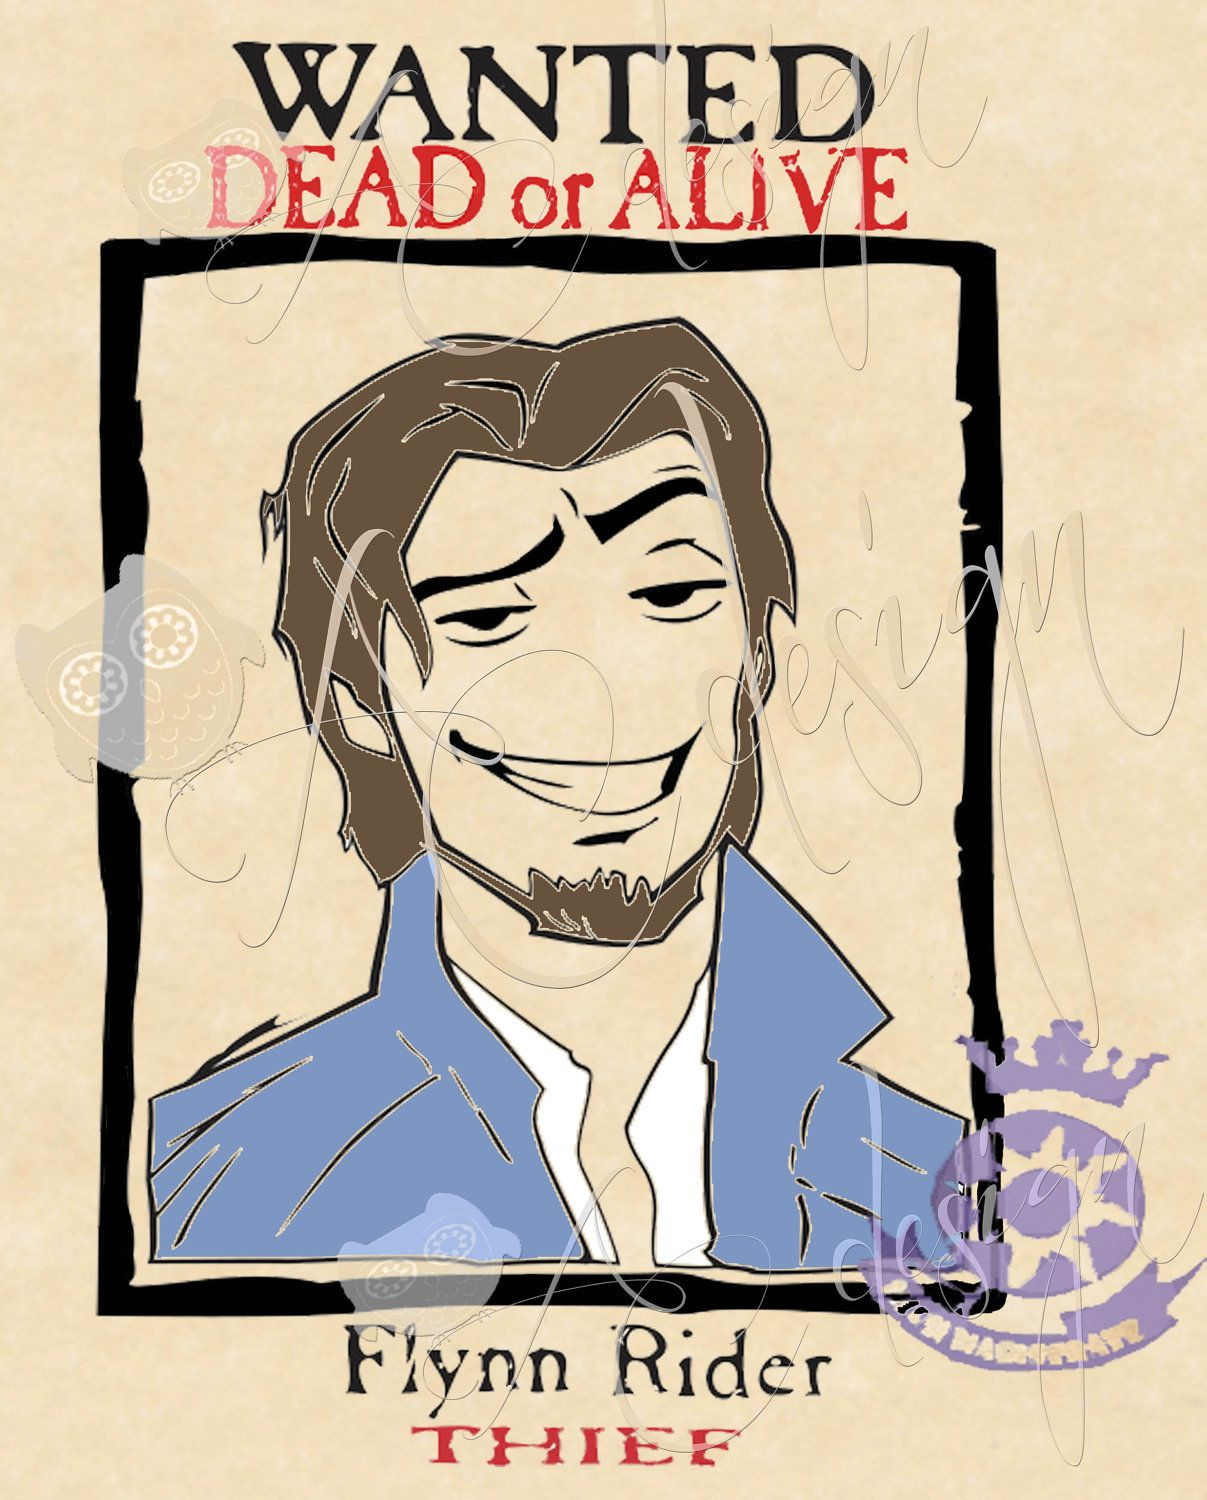 Flynn Rider Wanted Poster Decoration Forpartyprintsplus, $1.00 - Free Print...